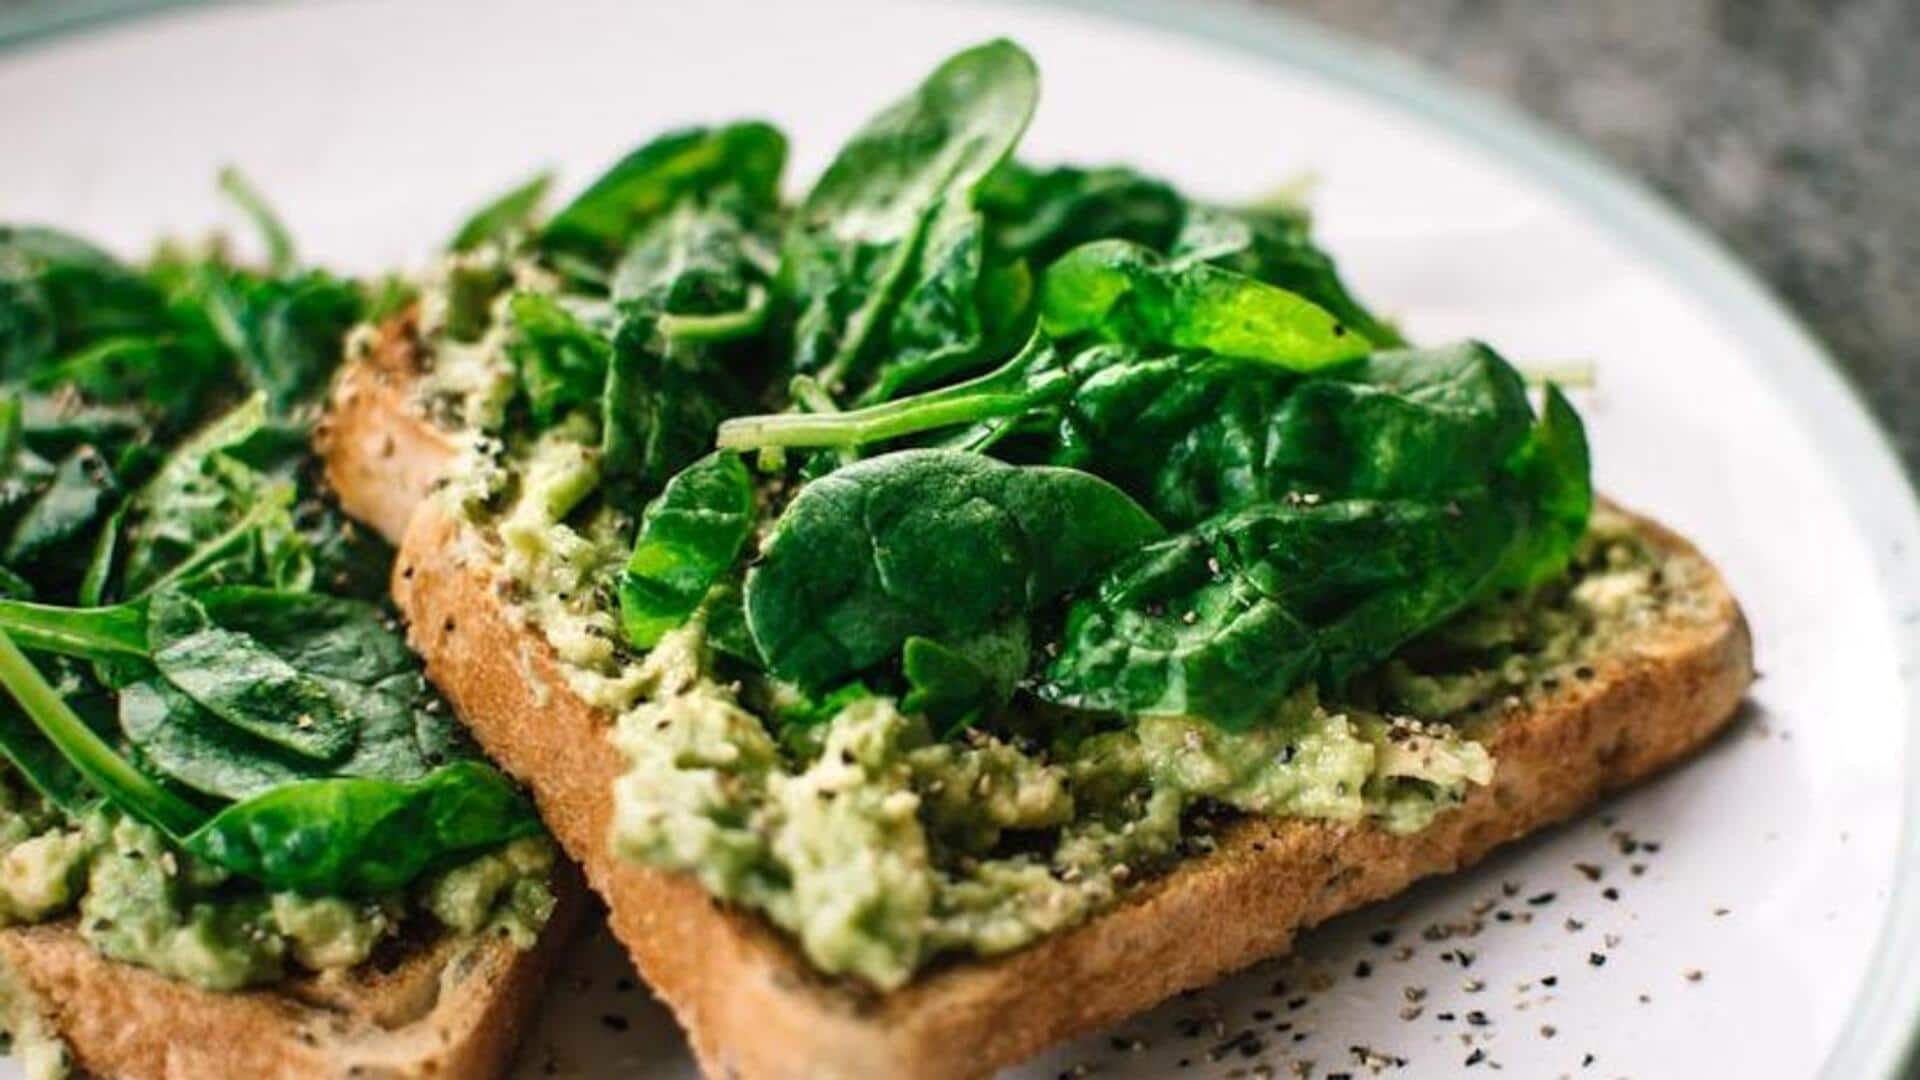 Wholesome plant-centric dishes for those following intermittent fasting